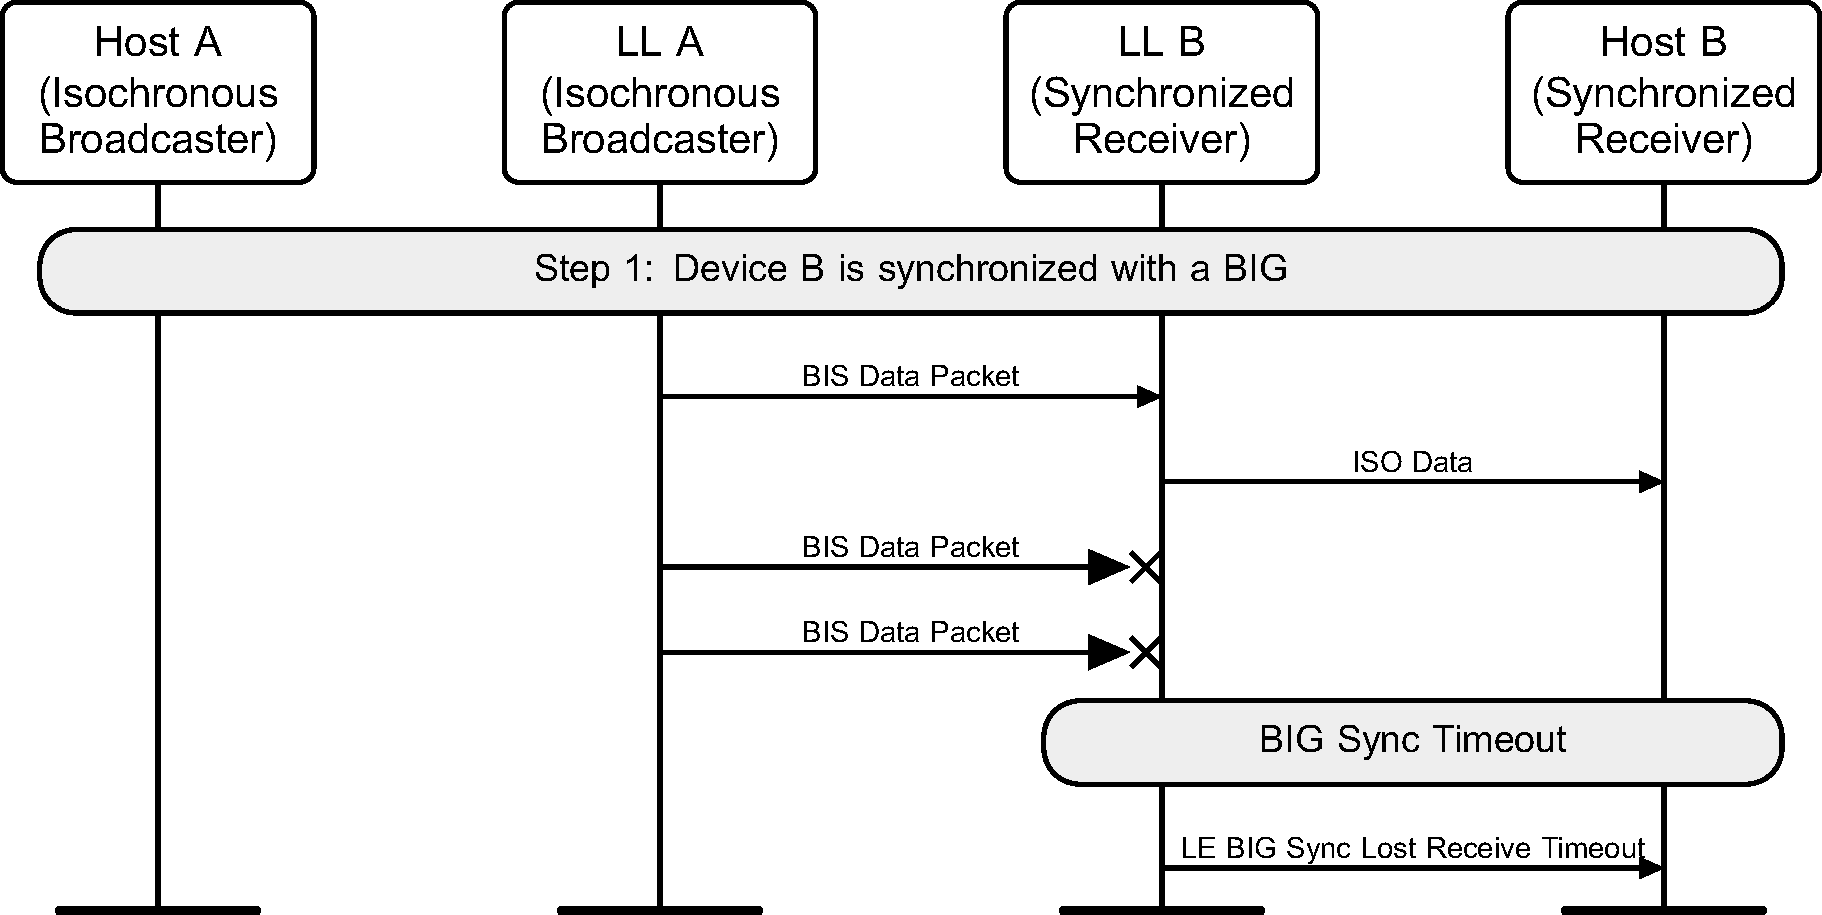 Device B loses synchronization with a BIG